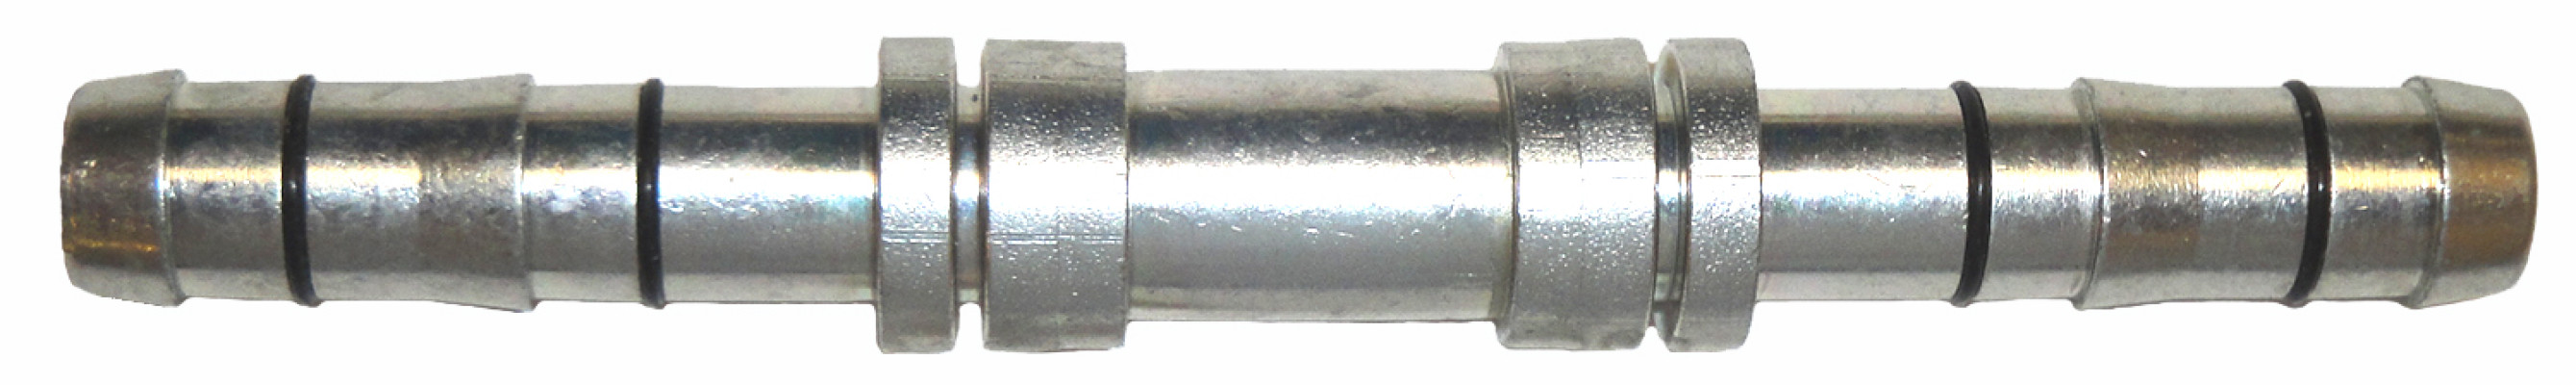 Image of A/C Refrigerant Hose Fitting from Sunair. Part number: FF14251